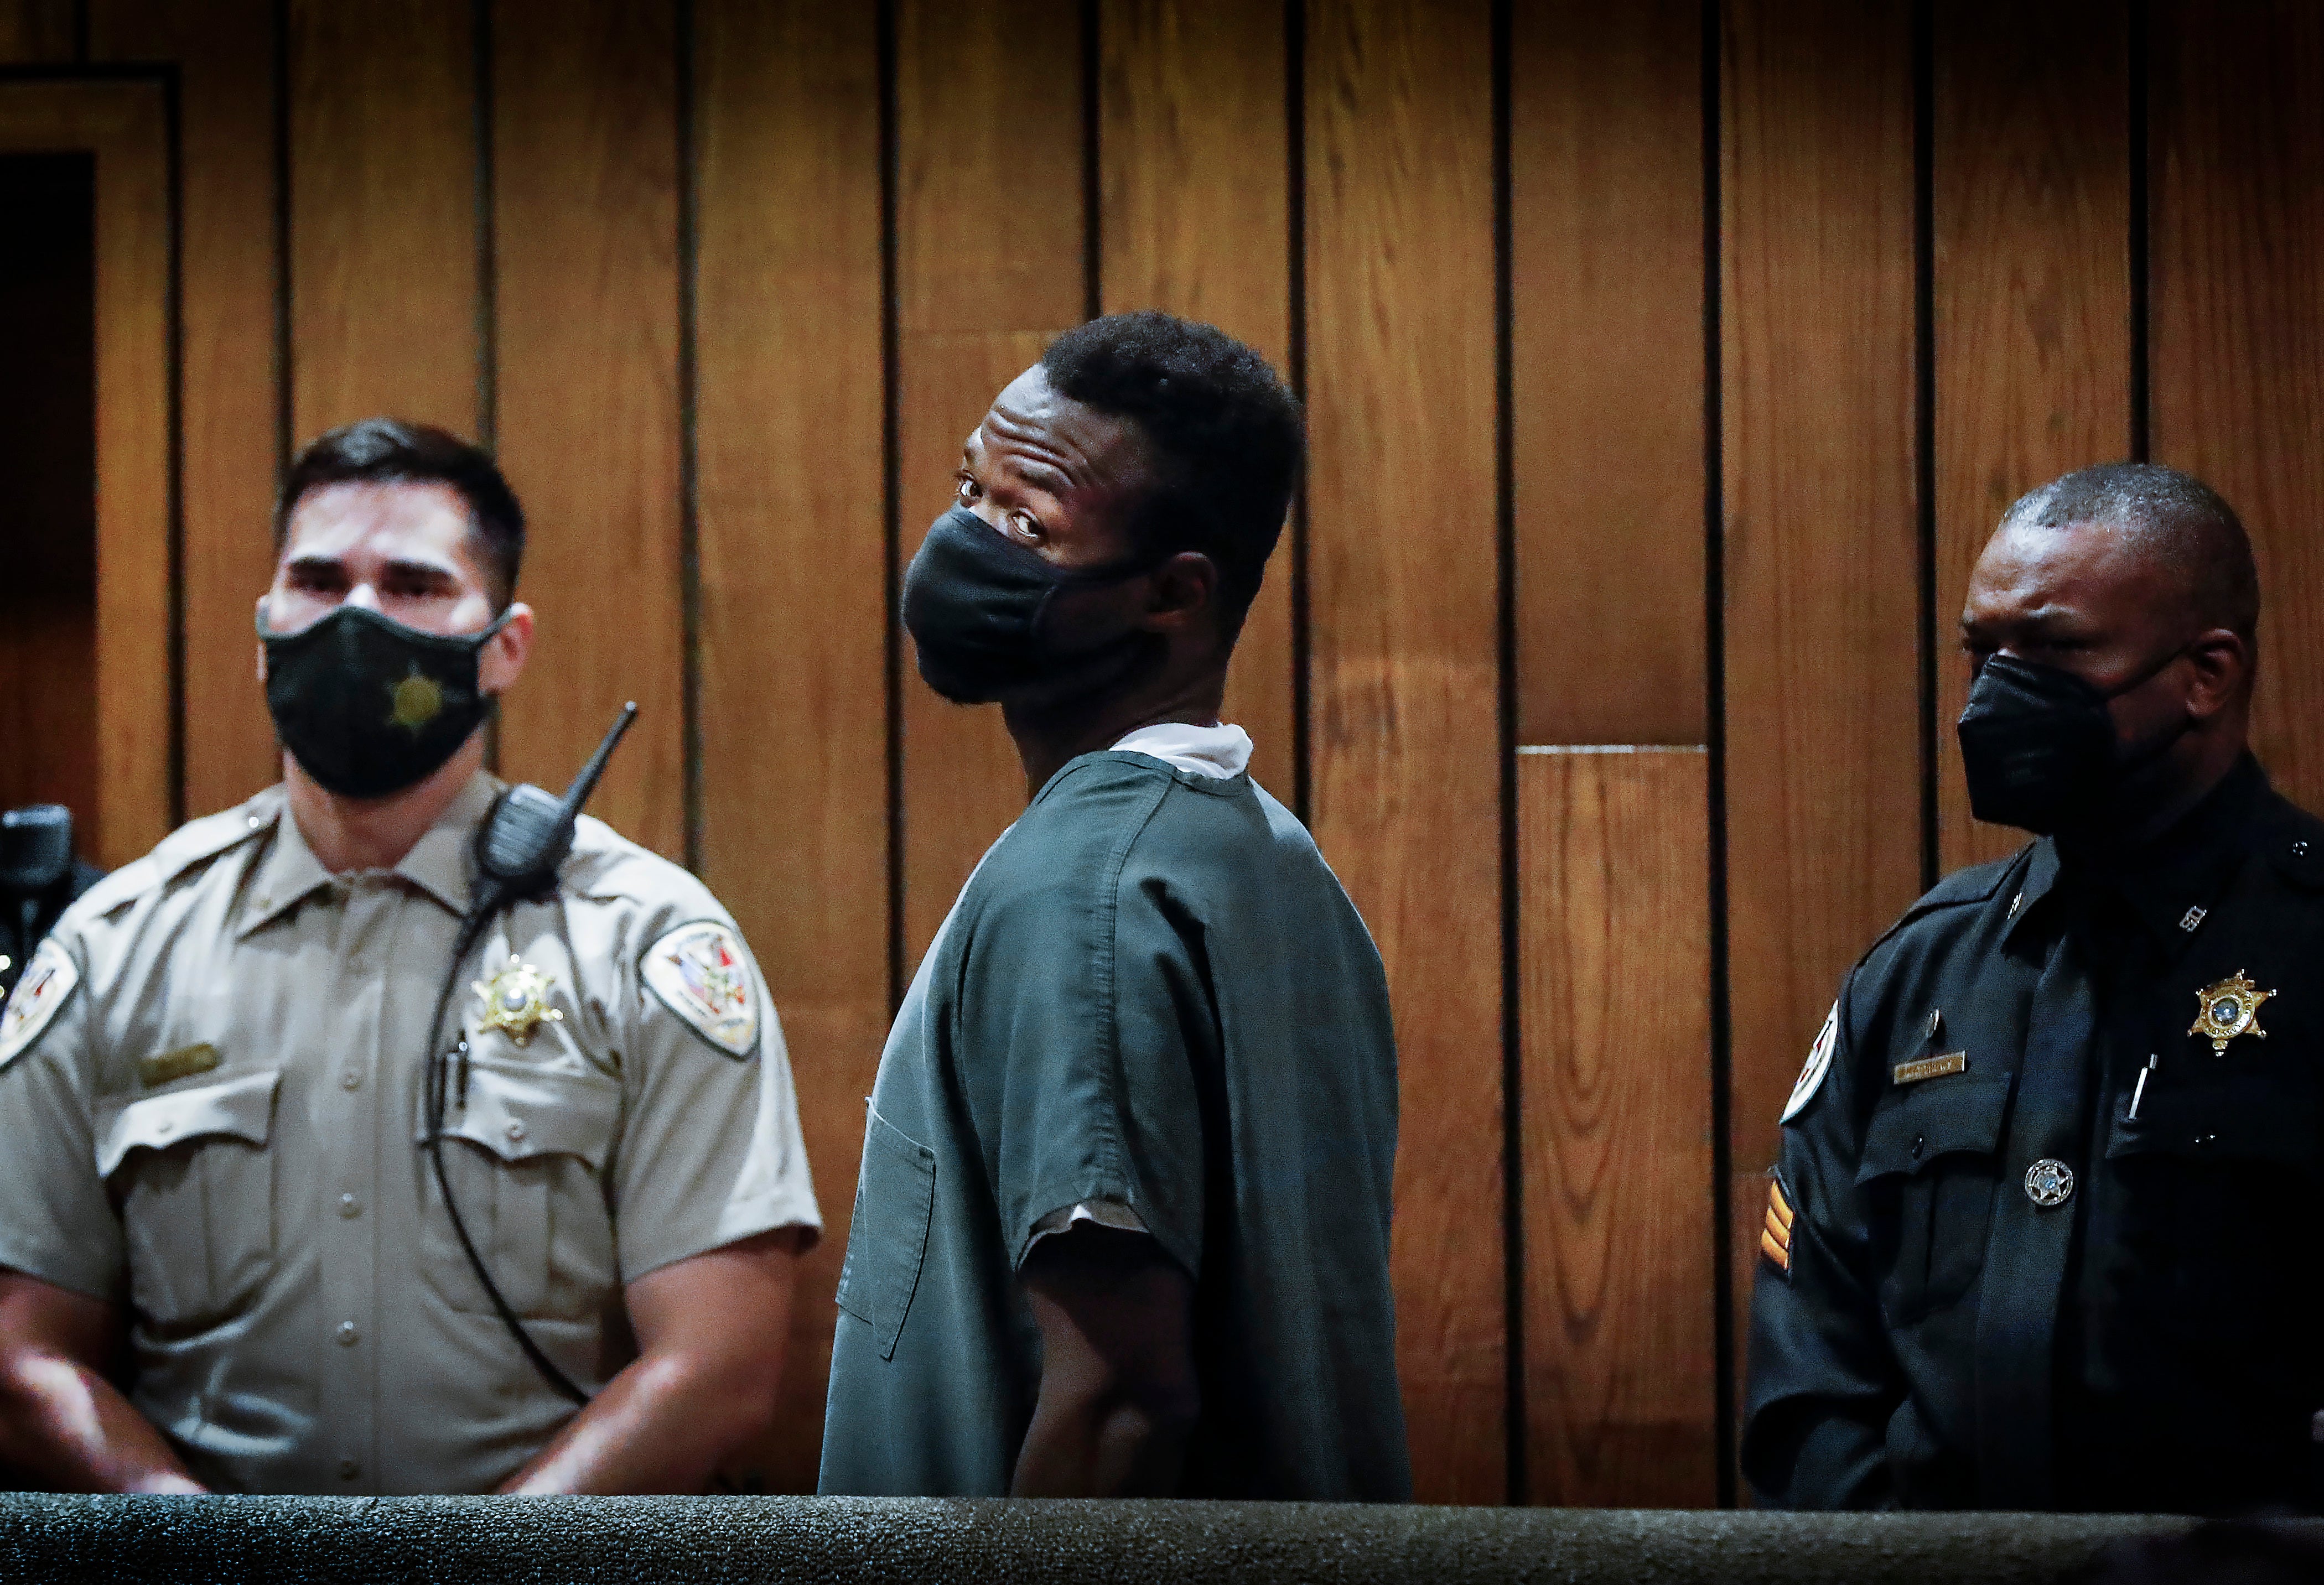 Cleotha Abston appears in Judge Louis Montesi courtroom for his arraignment on Tuesday, 6 September 2022 in Memphis